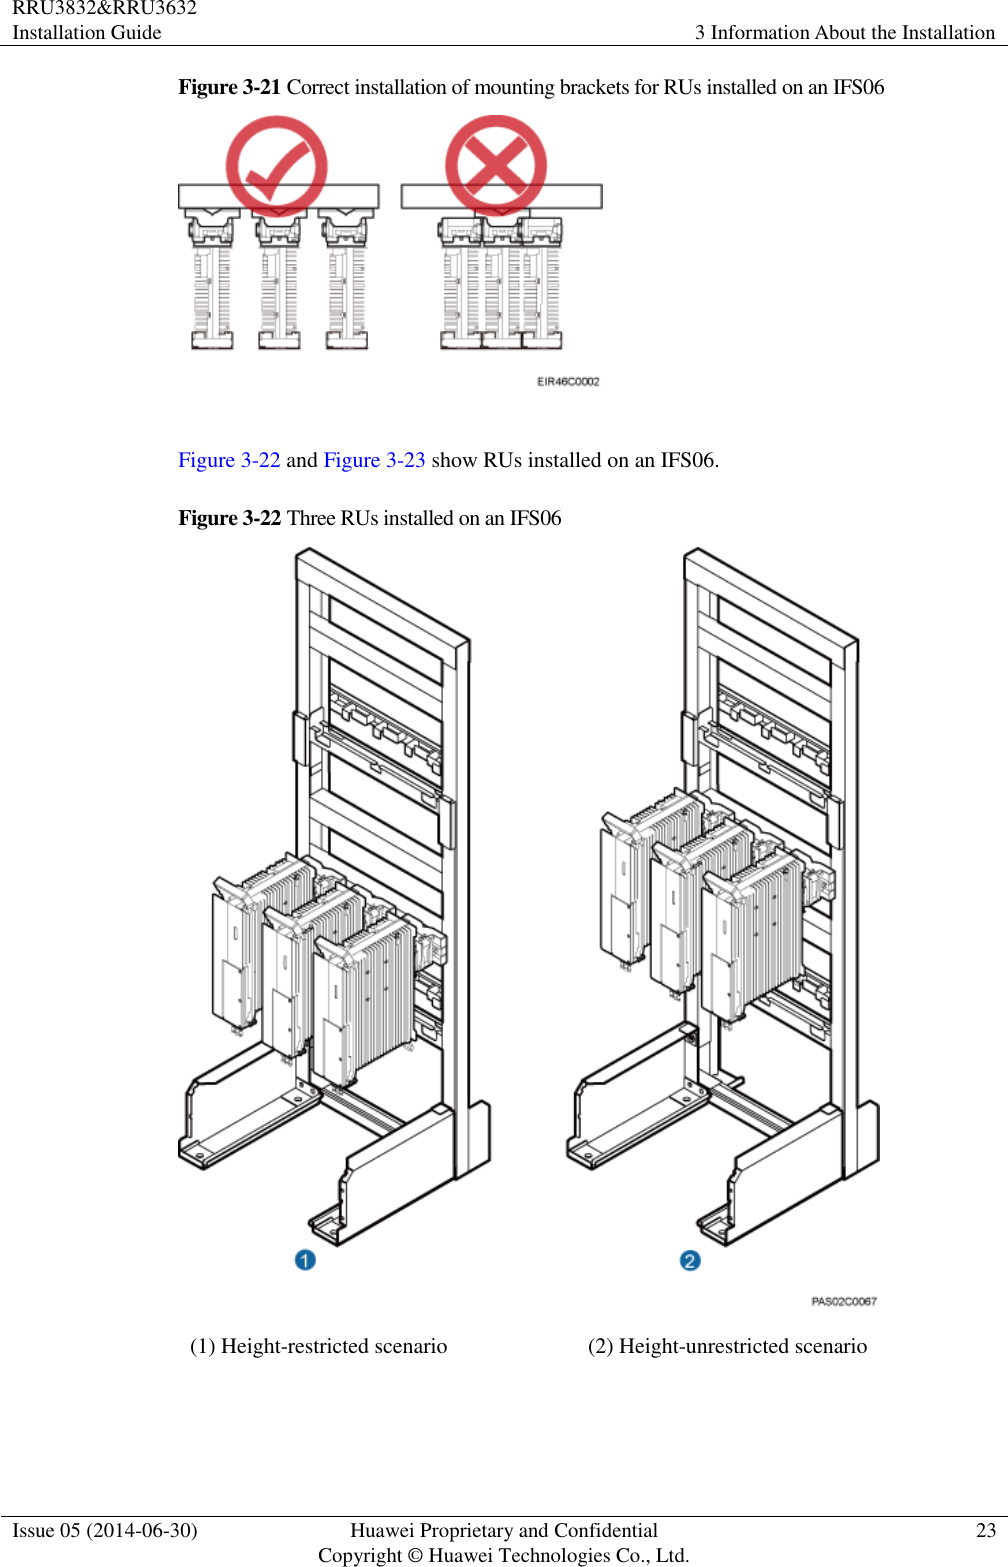 RRU3832&amp;RRU3632 Installation Guide 3 Information About the Installation  Issue 05 (2014-06-30) Huawei Proprietary and Confidential                                     Copyright © Huawei Technologies Co., Ltd. 23  Figure 3-21 Correct installation of mounting brackets for RUs installed on an IFS06   Figure 3-22 and Figure 3-23 show RUs installed on an IFS06. Figure 3-22 Three RUs installed on an IFS06  (1) Height-restricted scenario (2) Height-unrestricted scenario  